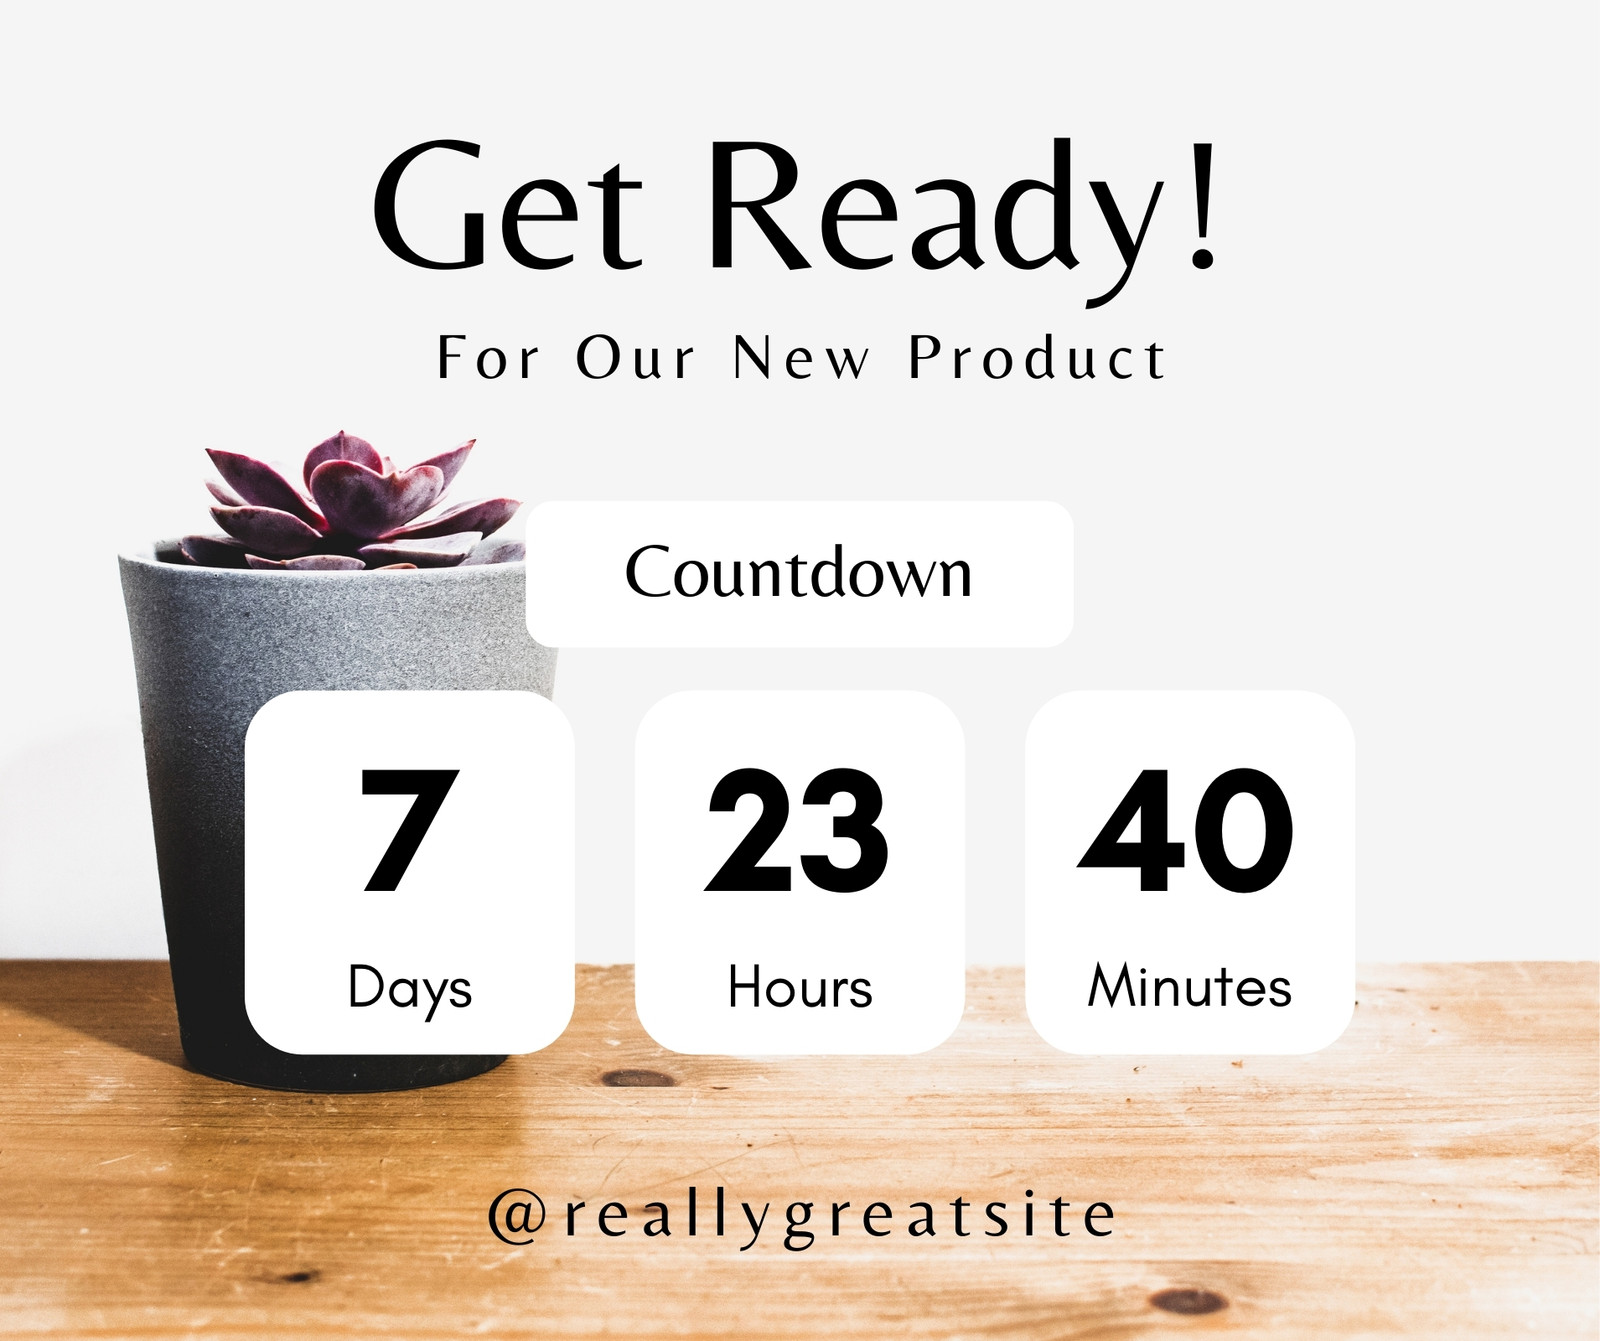 How to Make a Countdown Timer Video [+Free Templates] 